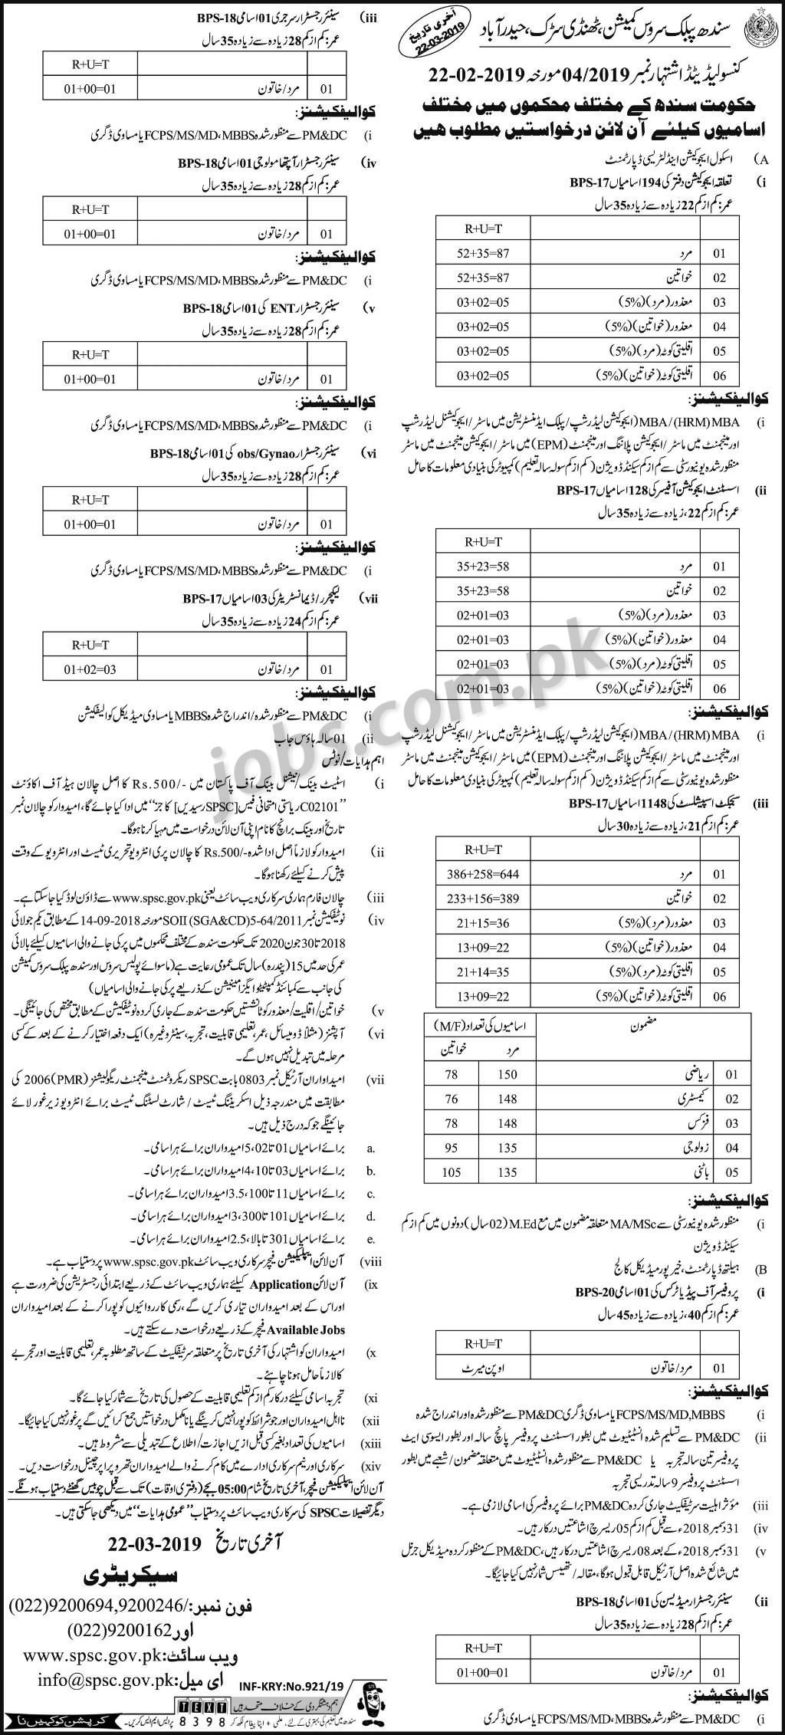 SPSC Jobs 4/2019: 1479+ Education Officers, Subject Specialists & Other Posts in Sindh Government Departments